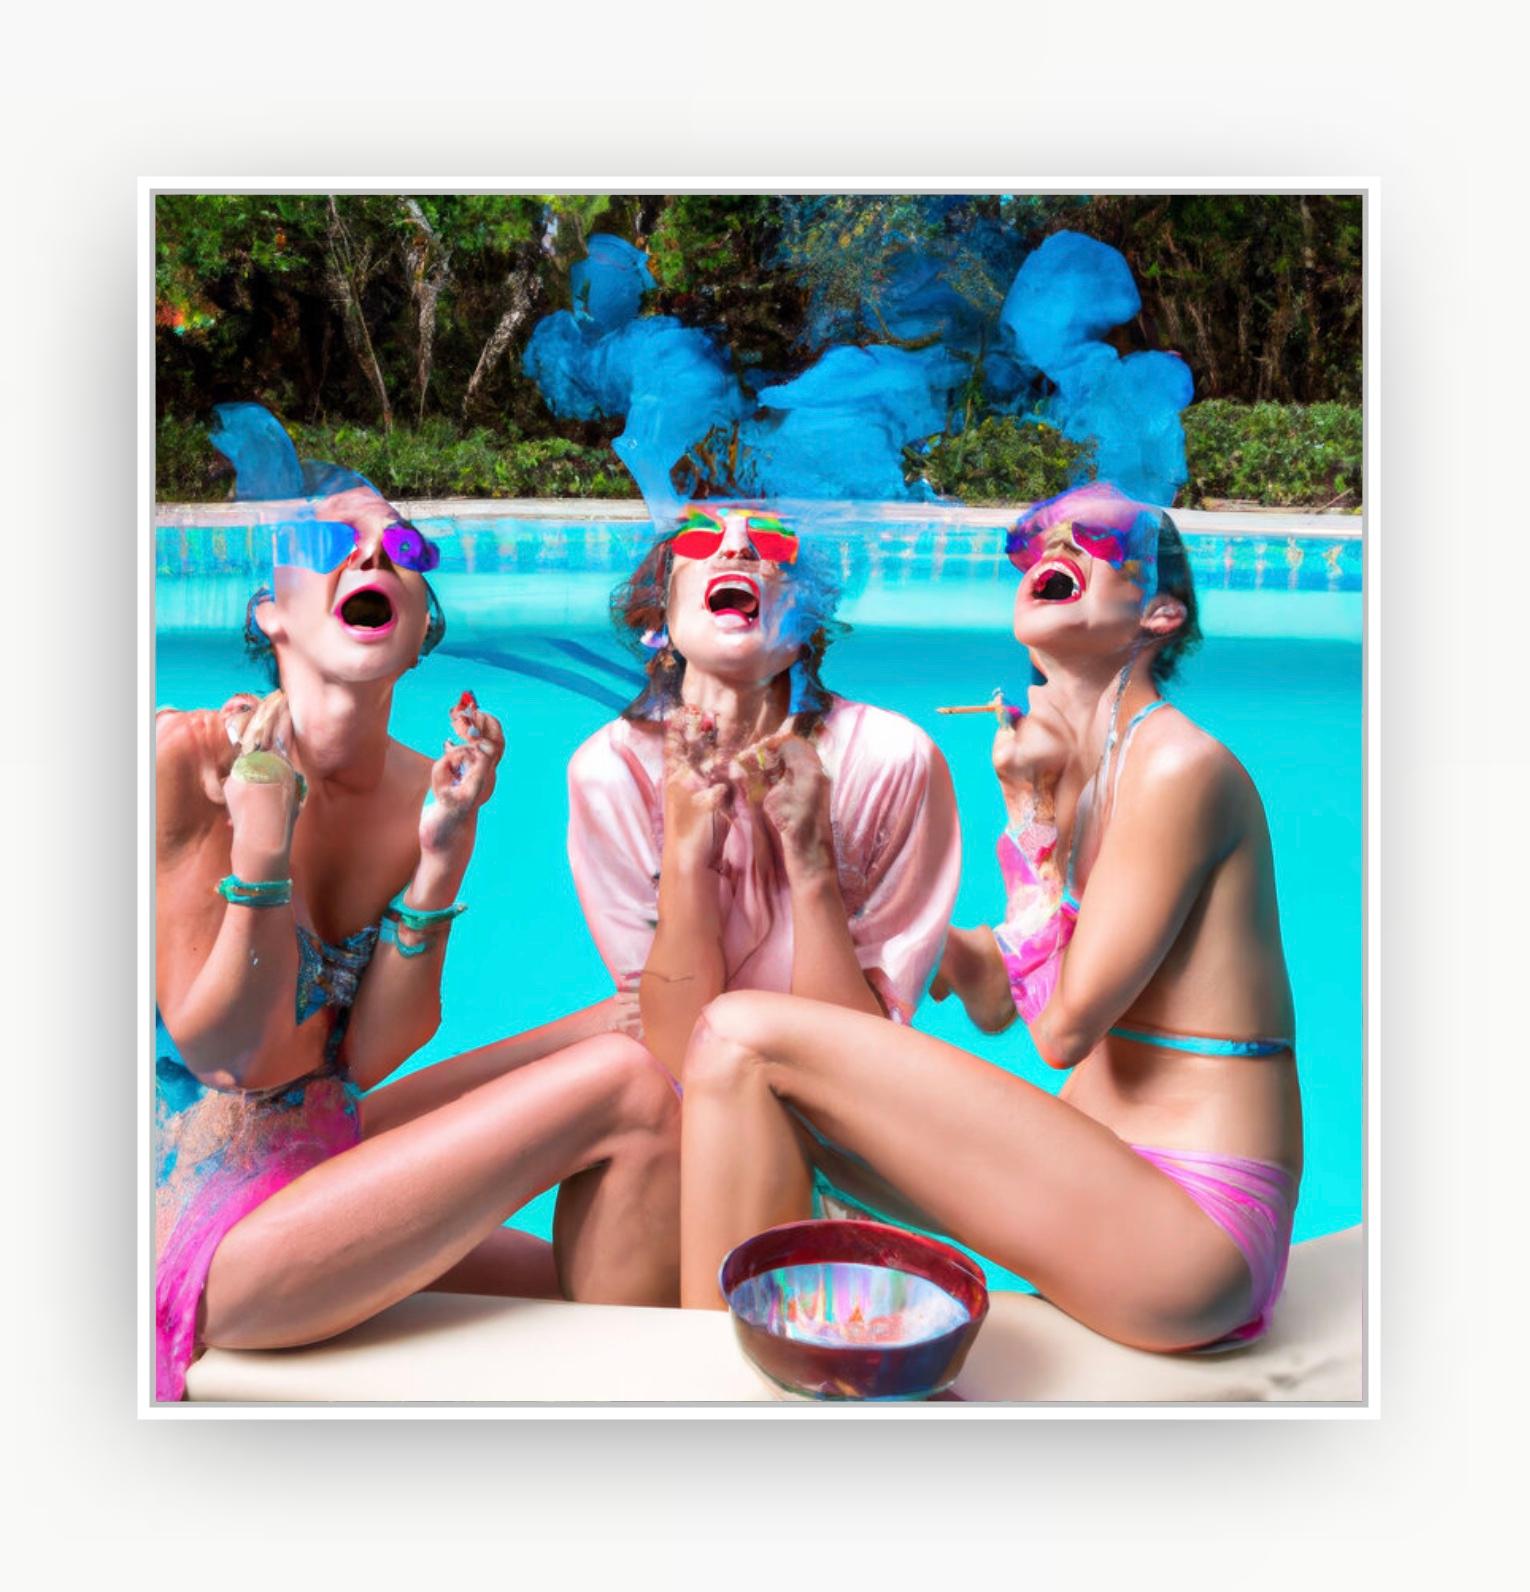 Poolside Party #41 (Naiades Series 1.0) - Photograph by Lee Wells